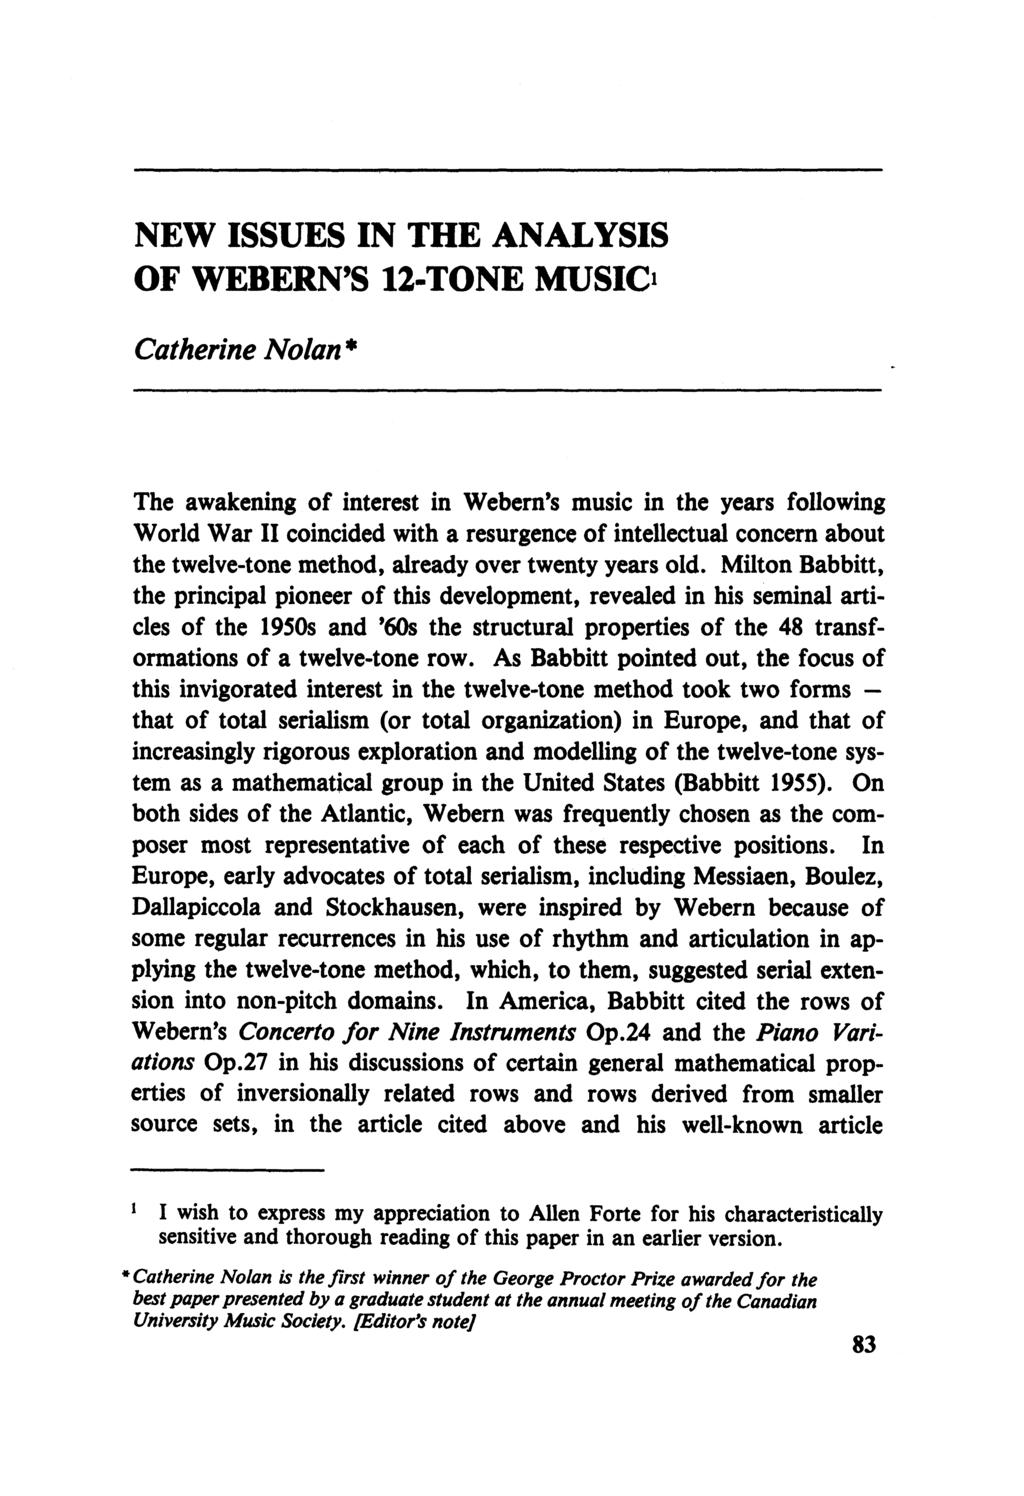 NEW ISSUES IN THE ANALYSIS OF WEBERN'S 12-TONE MUSIO Catherine Nolan* The awakening of interest in Webern's music in the years following World War II coincided with a resurgence of intellectual